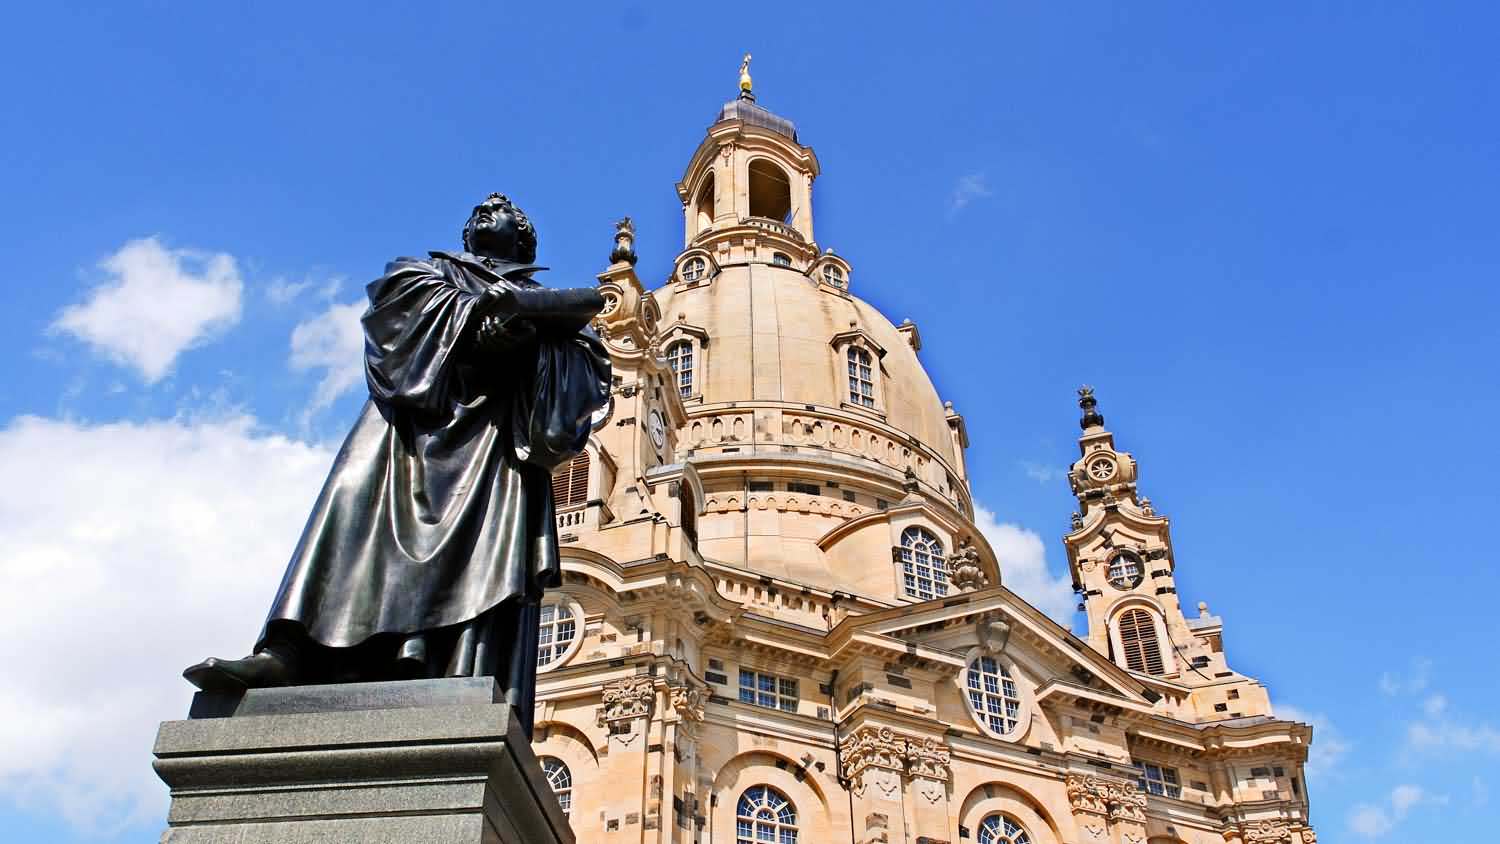 Statue of martin luther and Dresden Frauenkirche church